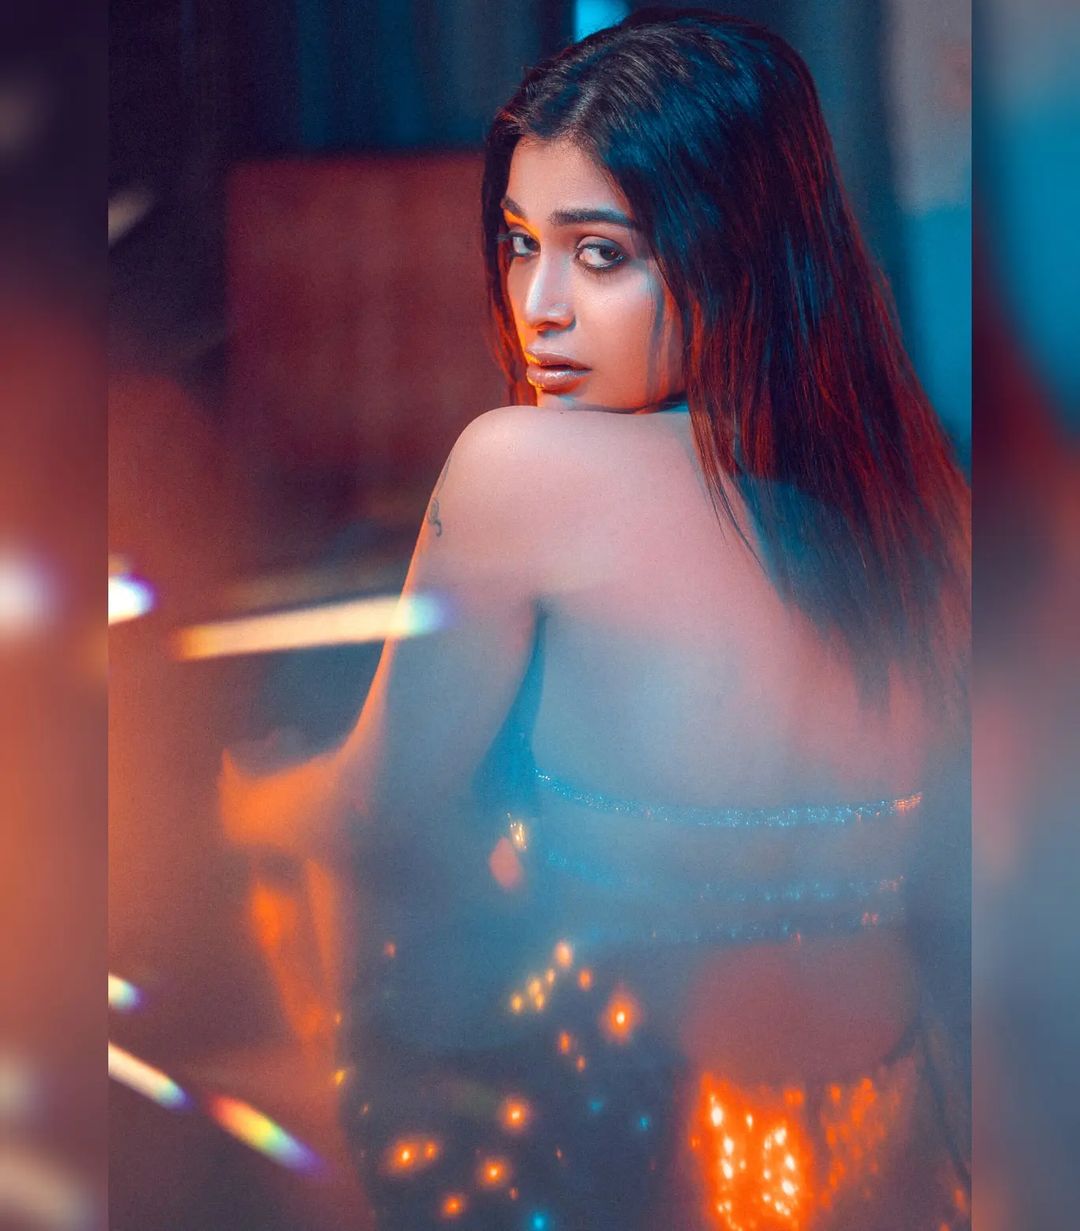 dharsha gupta hot photos for new year wishes getting viral on social media